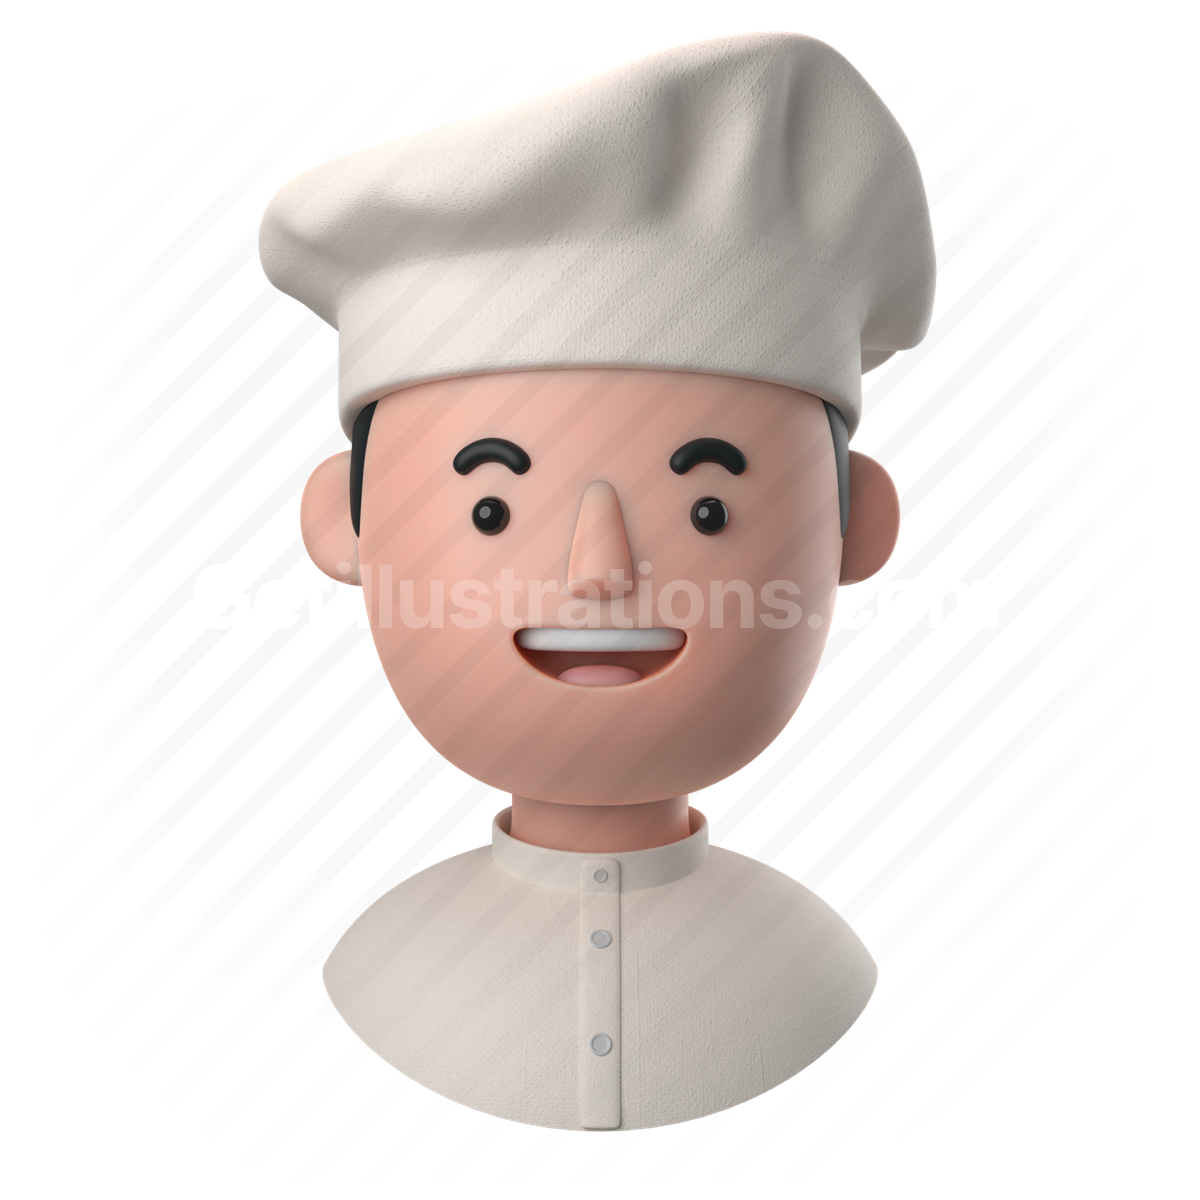 man, male, people, person, chef, occupation, cook